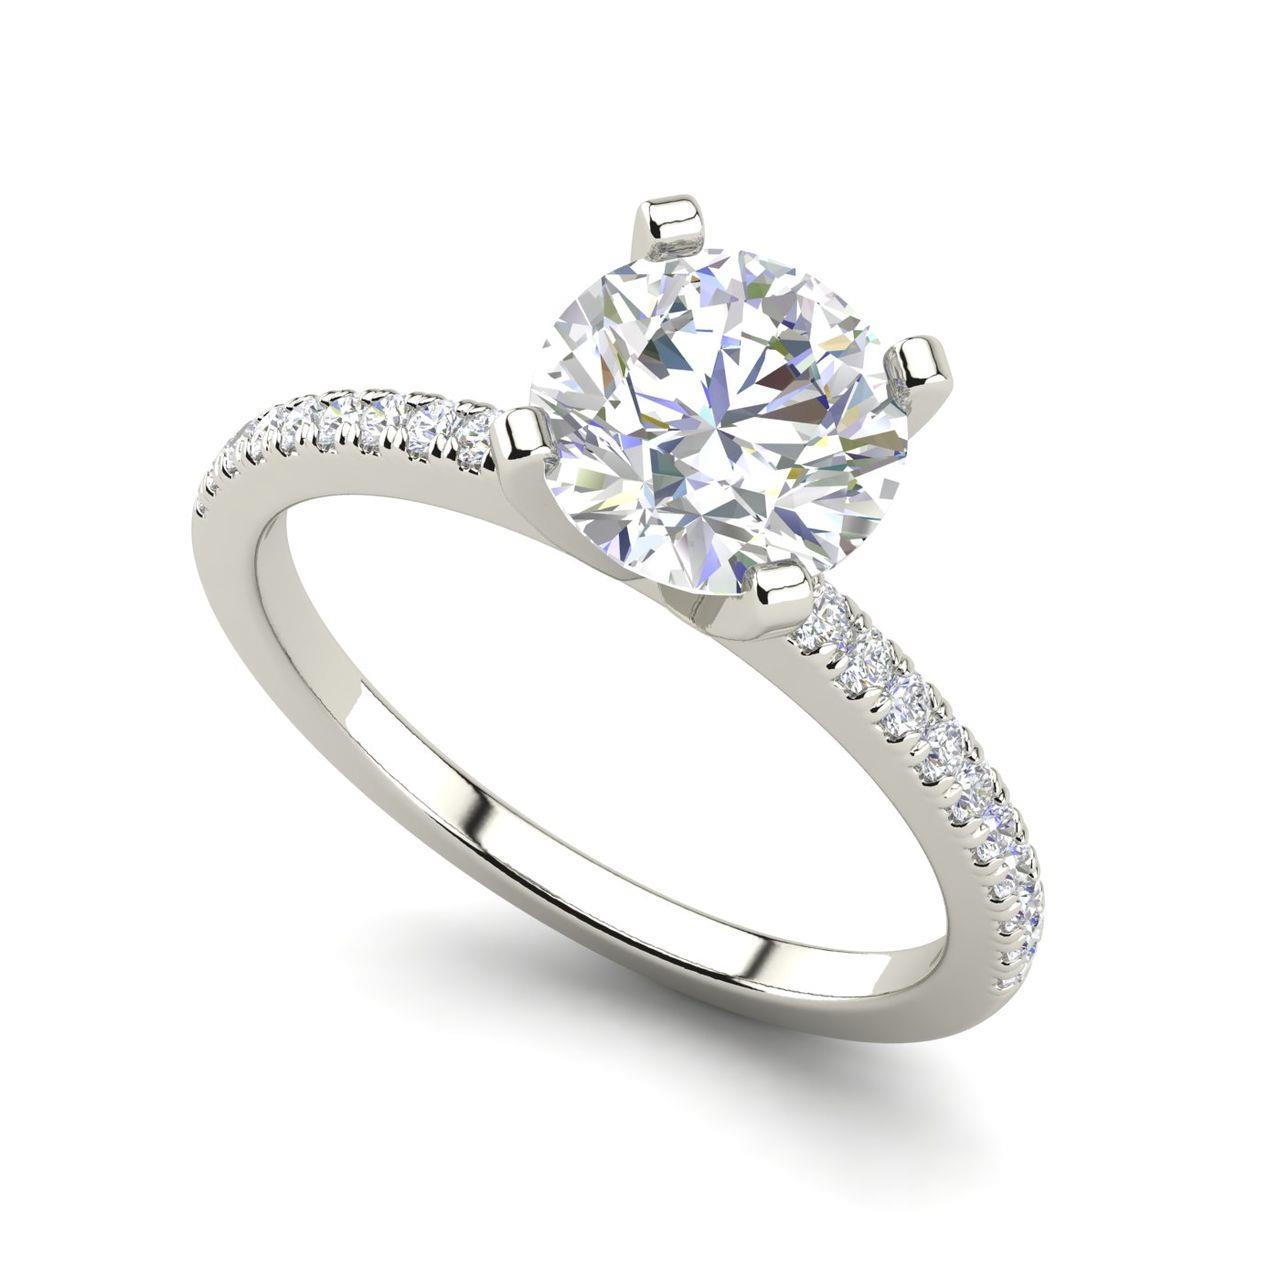 French Pave 0.75 Carat Round Cut Diamond Engagement Ring